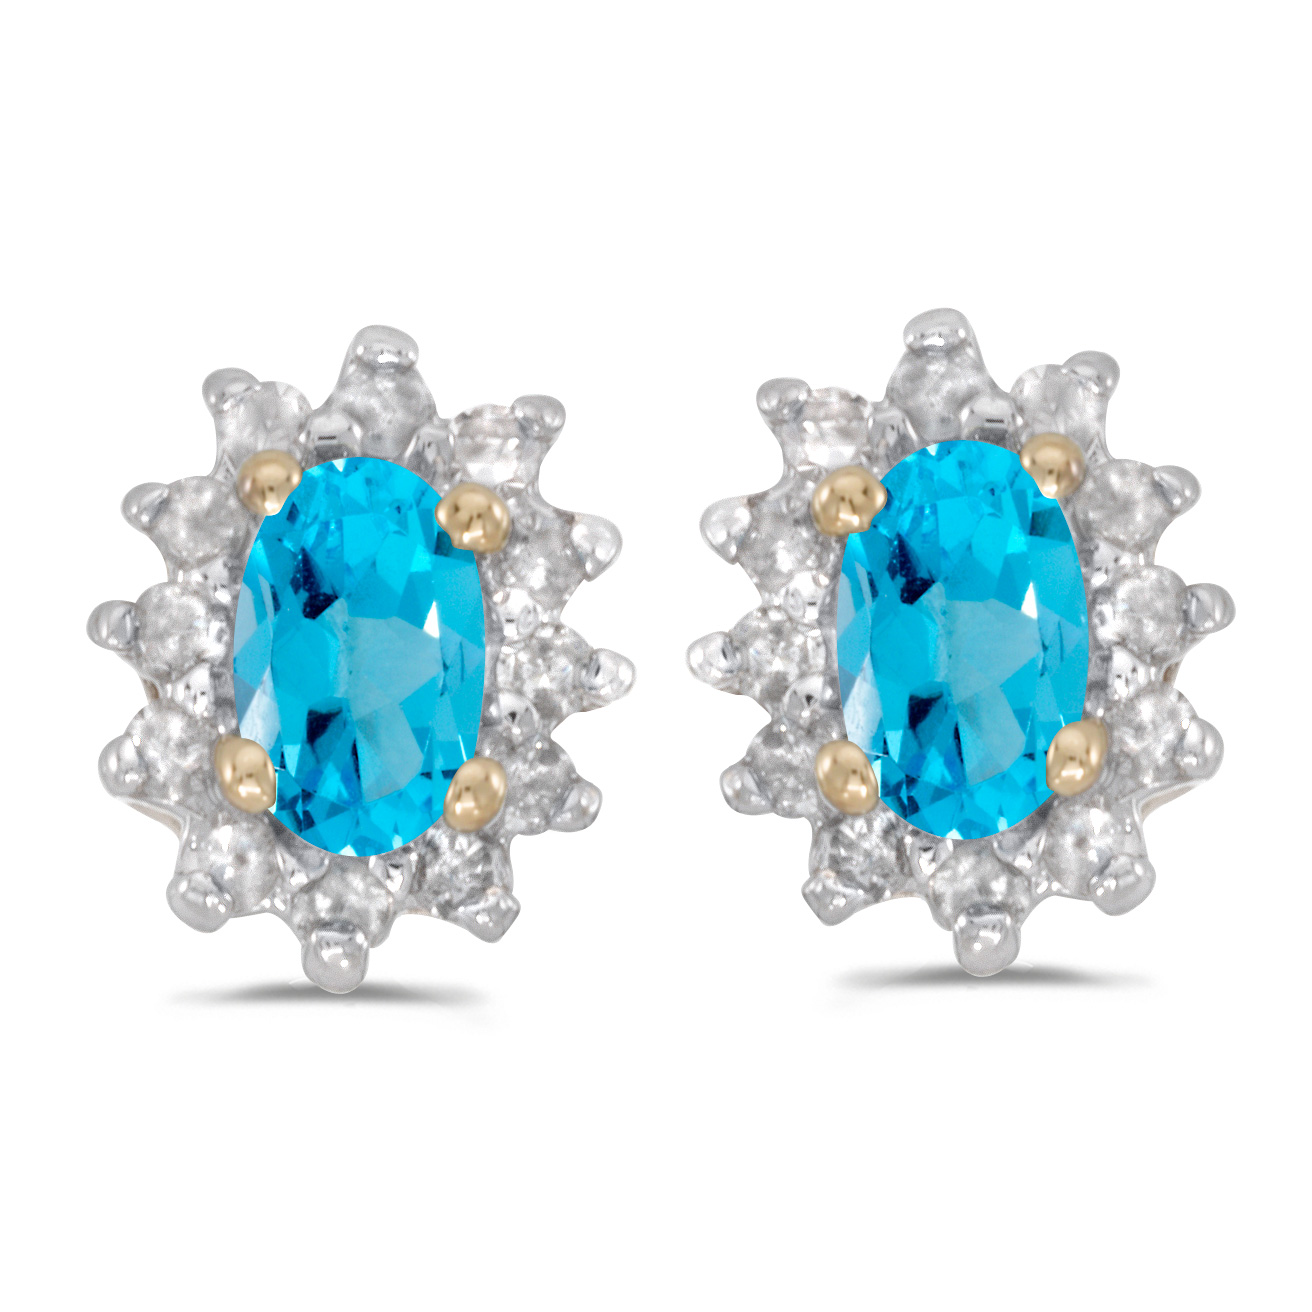 DIRECT-JEWELRY DON'T FORGET THE DASH 14k Yellow Gold Oval Blue Topaz And Diamond Earrings